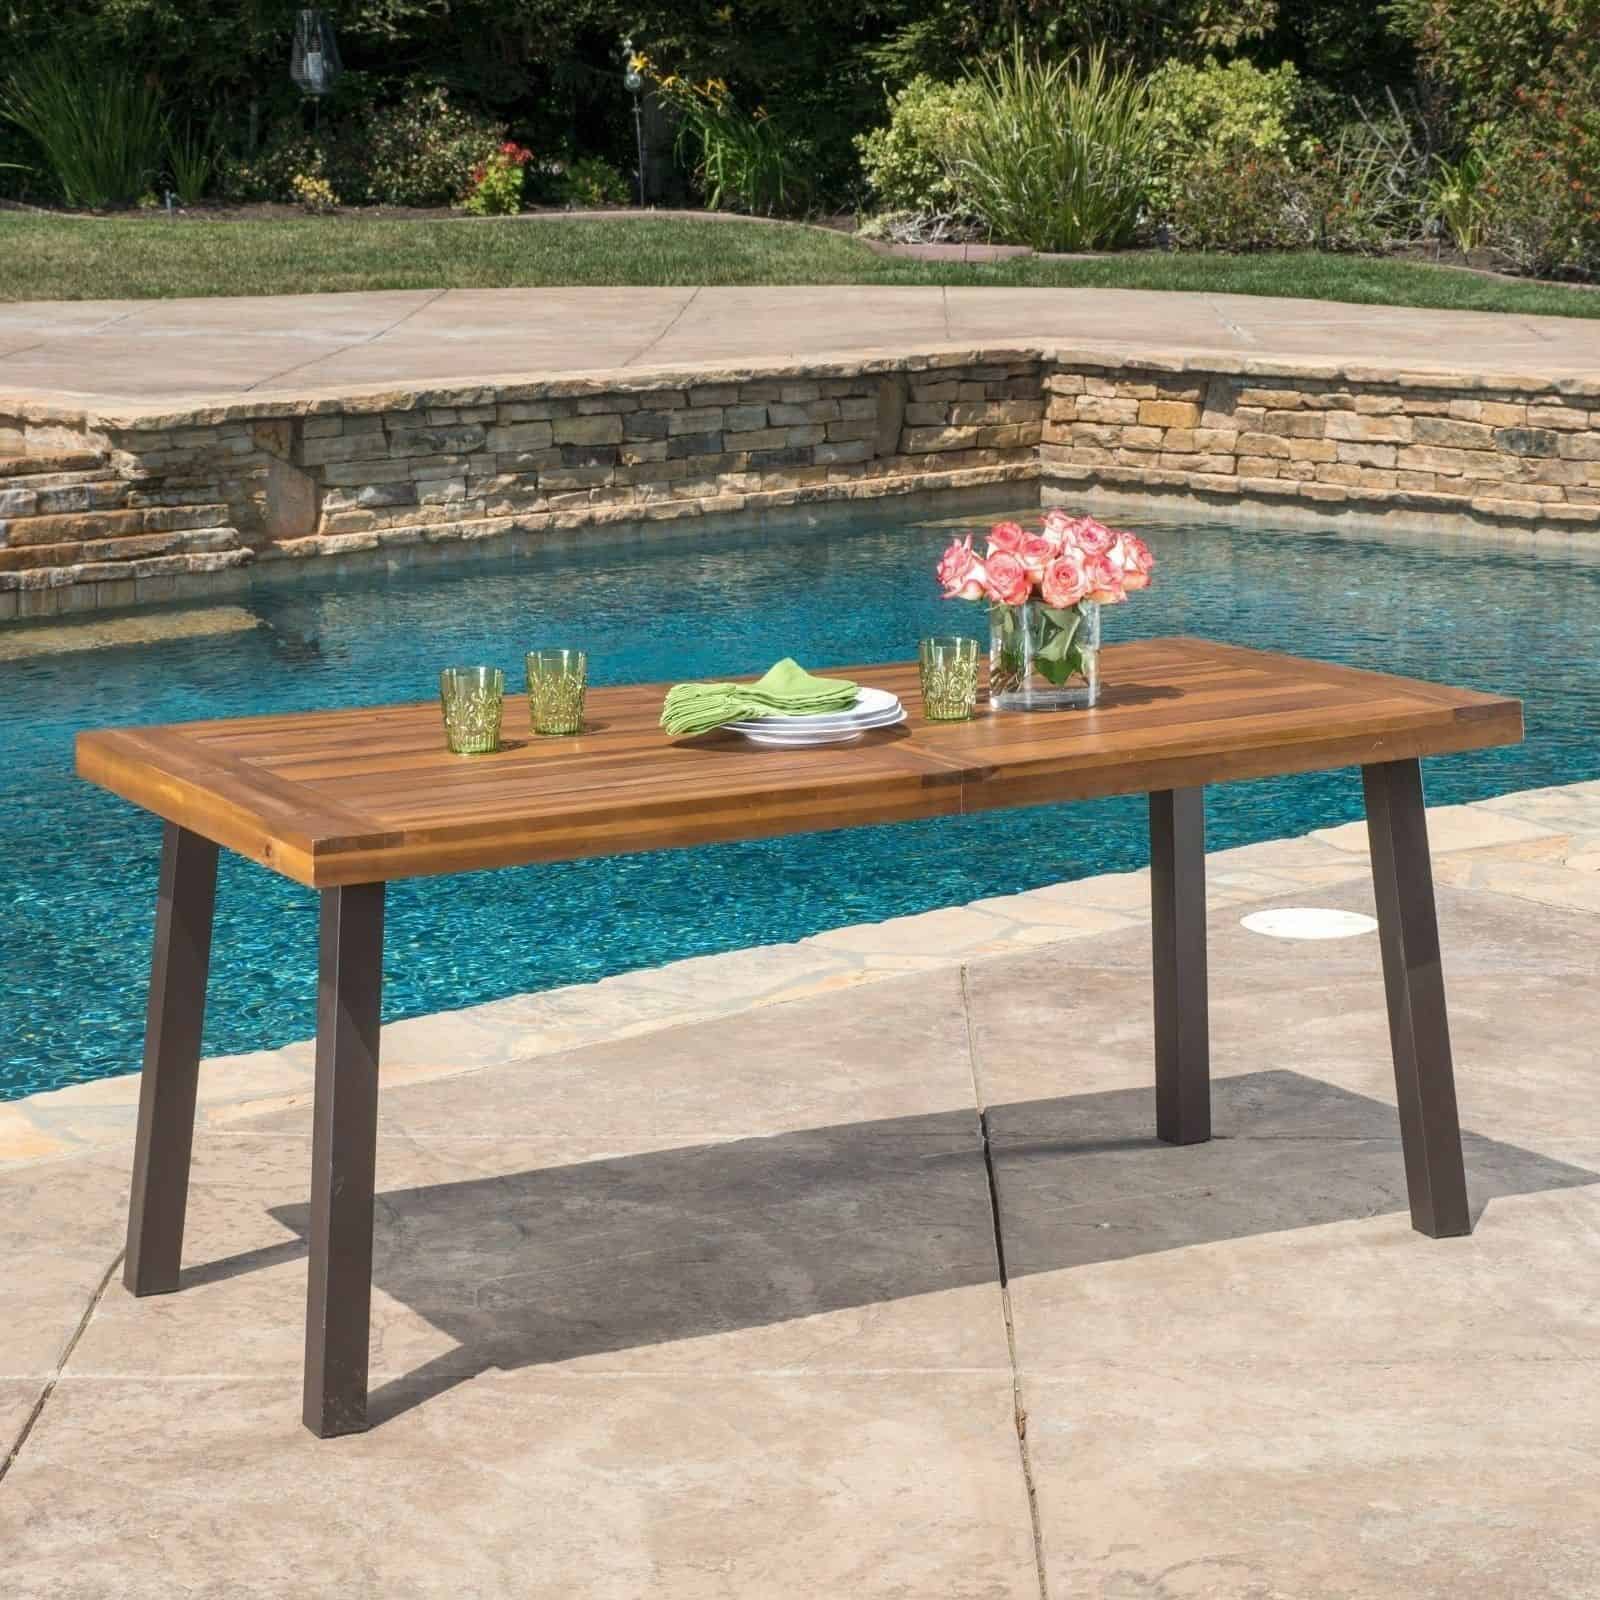 An outdoor dining table next to a pool.